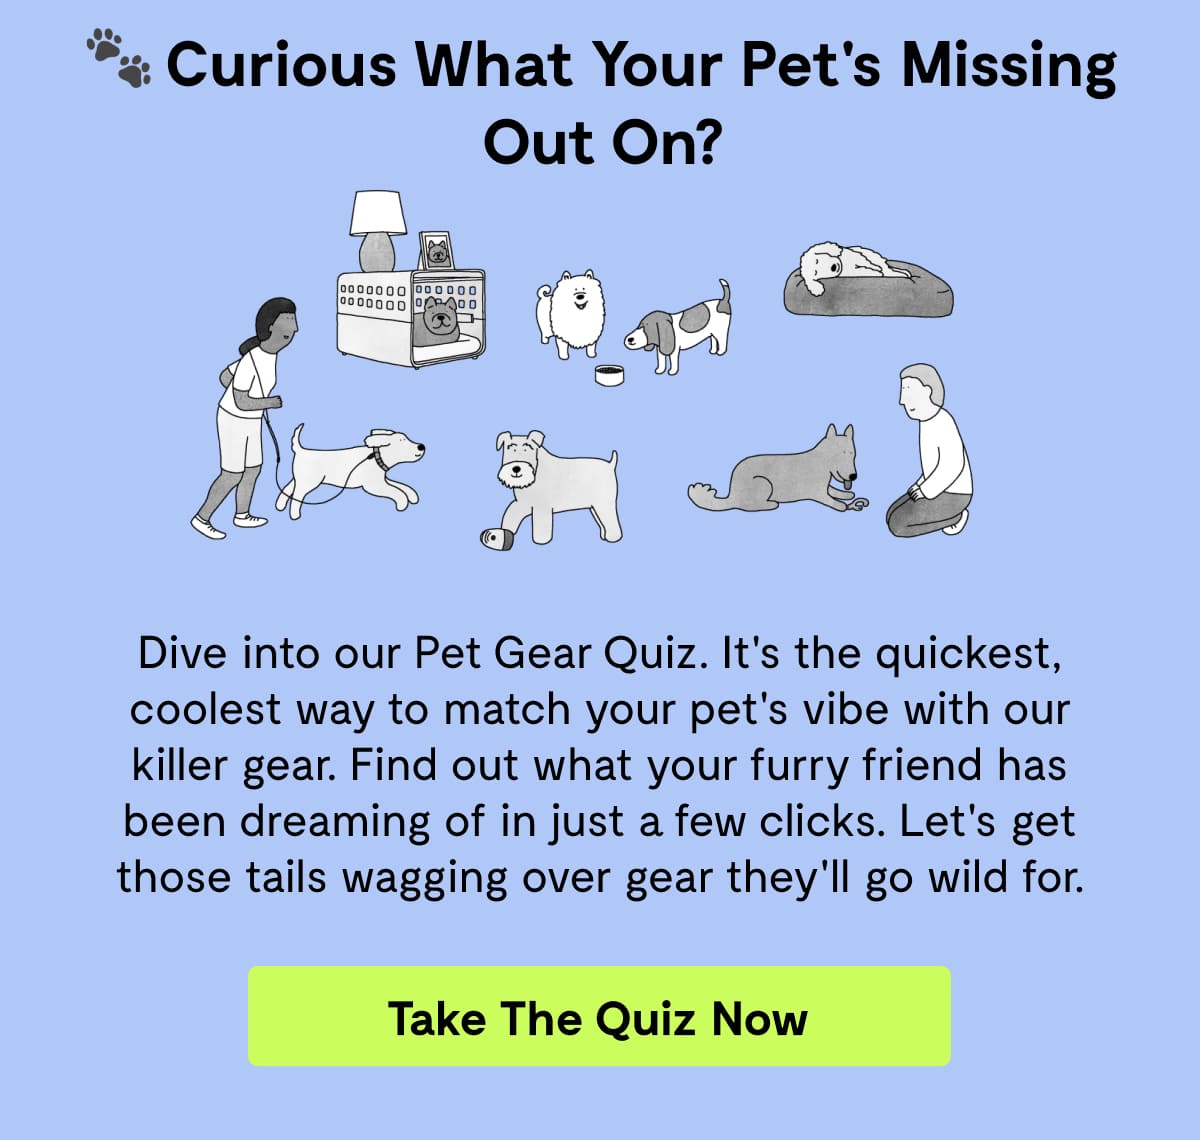 Dive into our Pet Gear Quiz. It's the quickest, coolest way to match your pet's vibe with our killer gear. Find out what your furry friend has been dreaming of in just a few clicks. Let's get those tails wagging over gear they'll go wild for.